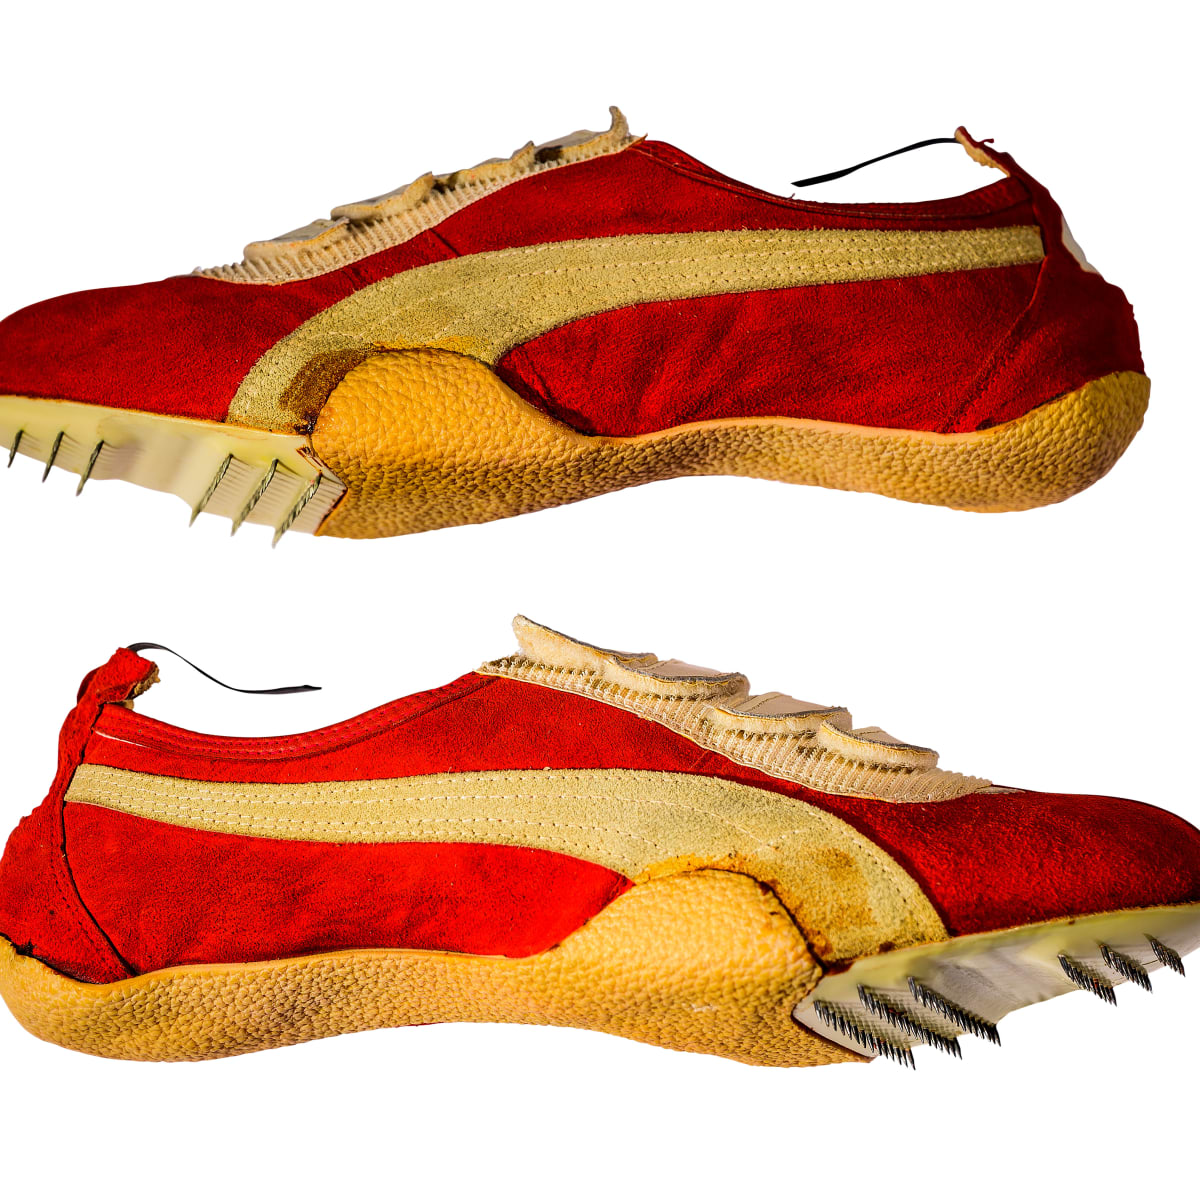 The Puma shoe that upended the 1968 